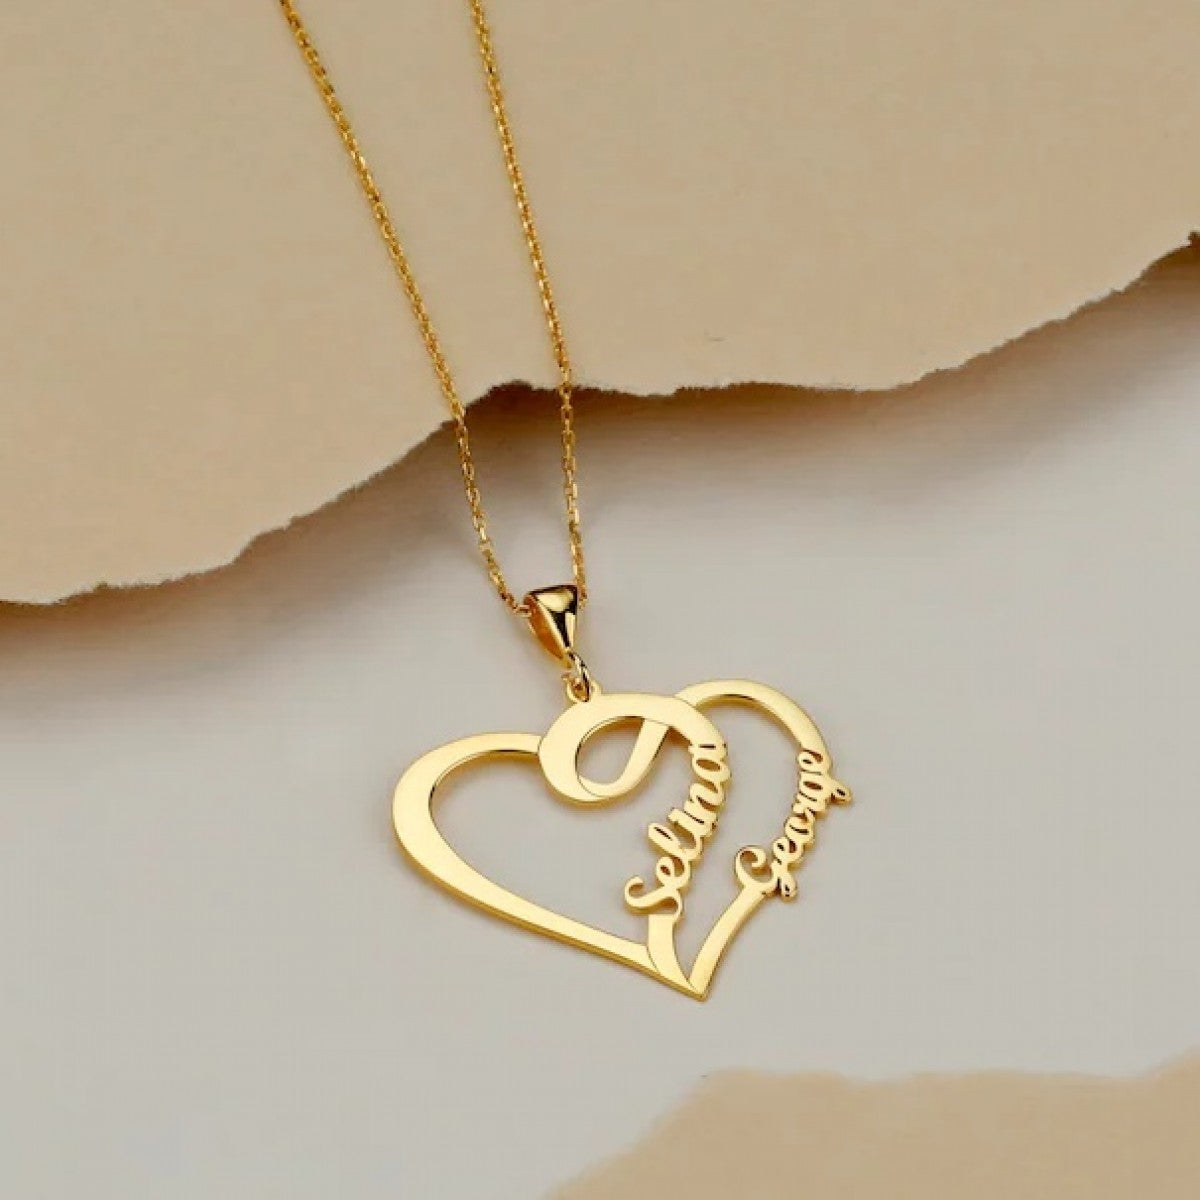 Buy Love Script Necklace, Sentimental Gift for Her, Daughter Gift,  Girlfriend Necklace, Anniversary Gift, I Love You Jewelry, Wedding  Bridesmaid Online in India - Etsy